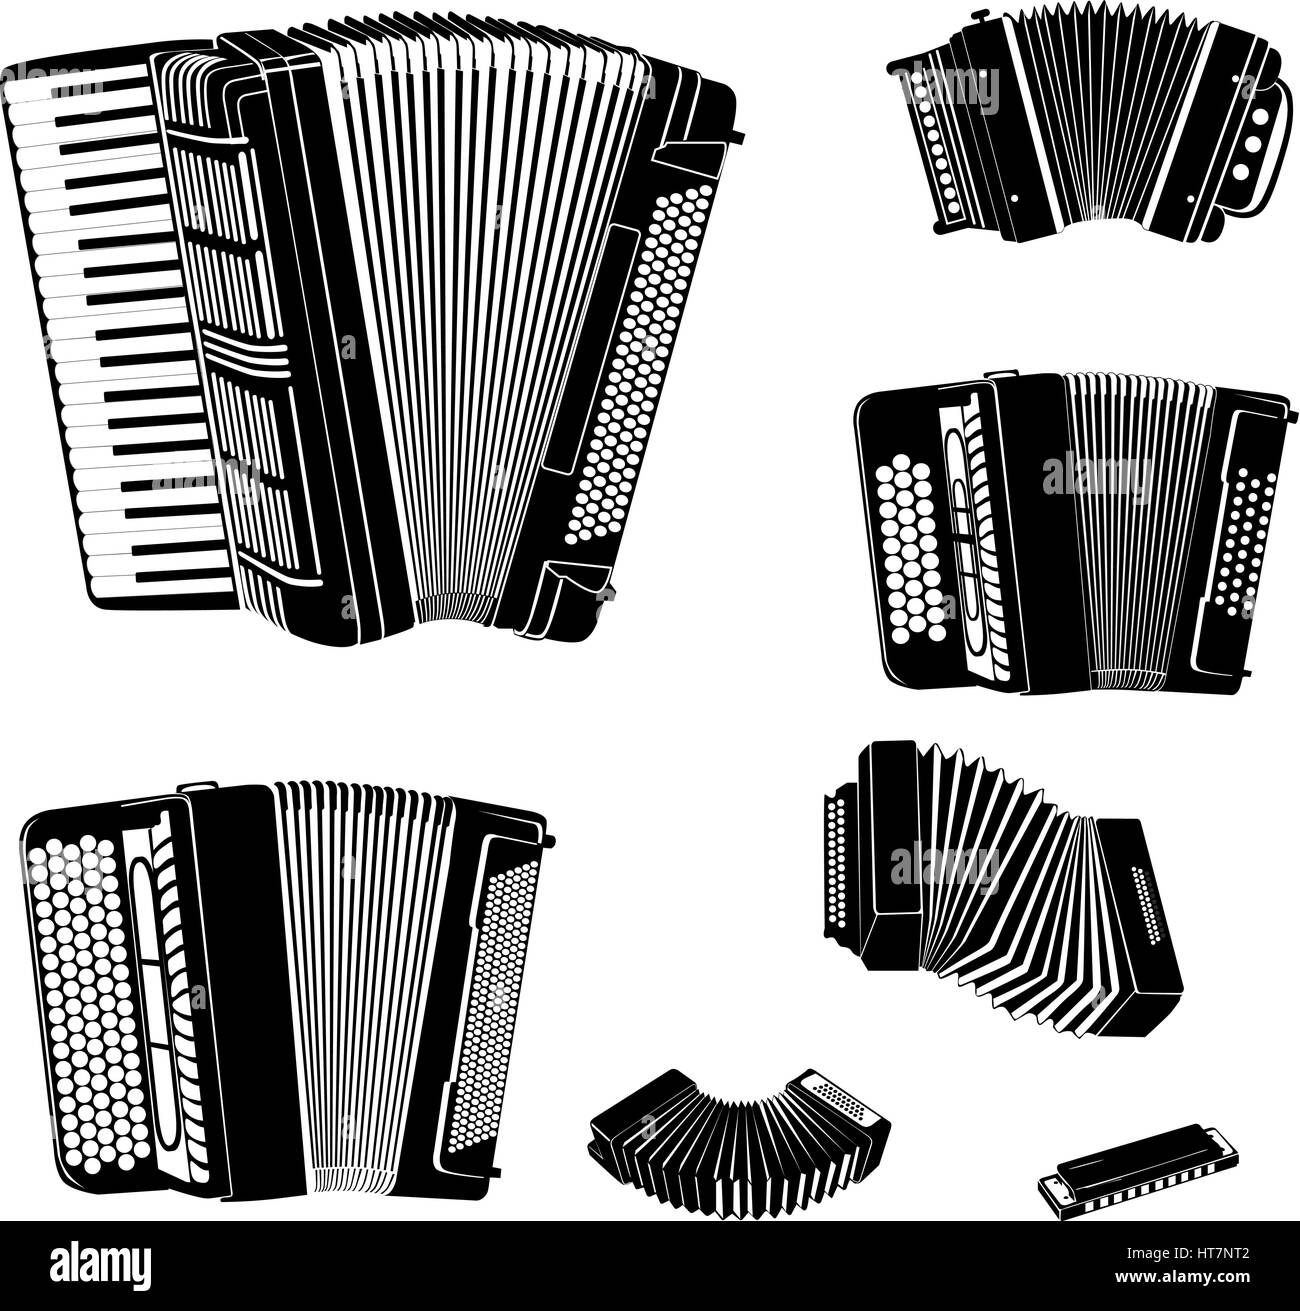 Music instruments vector set. Musical instrument silhouette on white background. Accordion family music equipment collection. Stock Vector